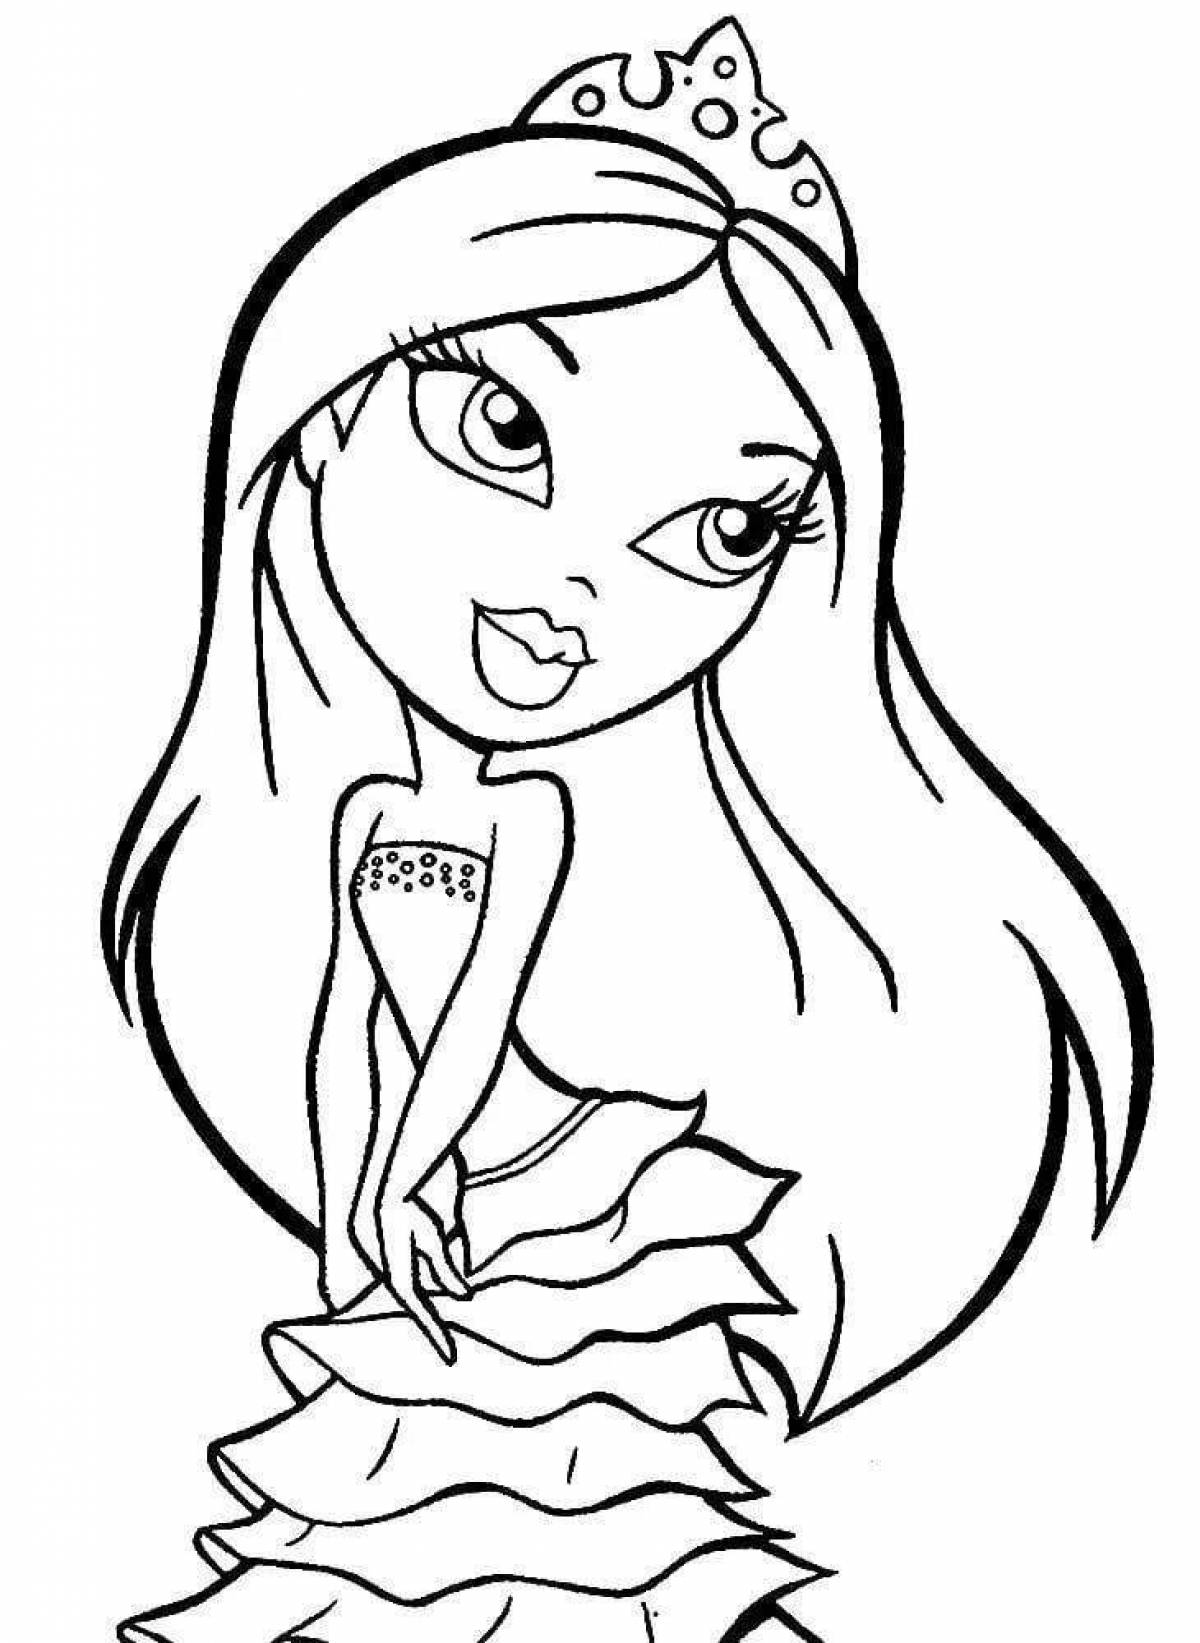 Irresistible coloring page decorated